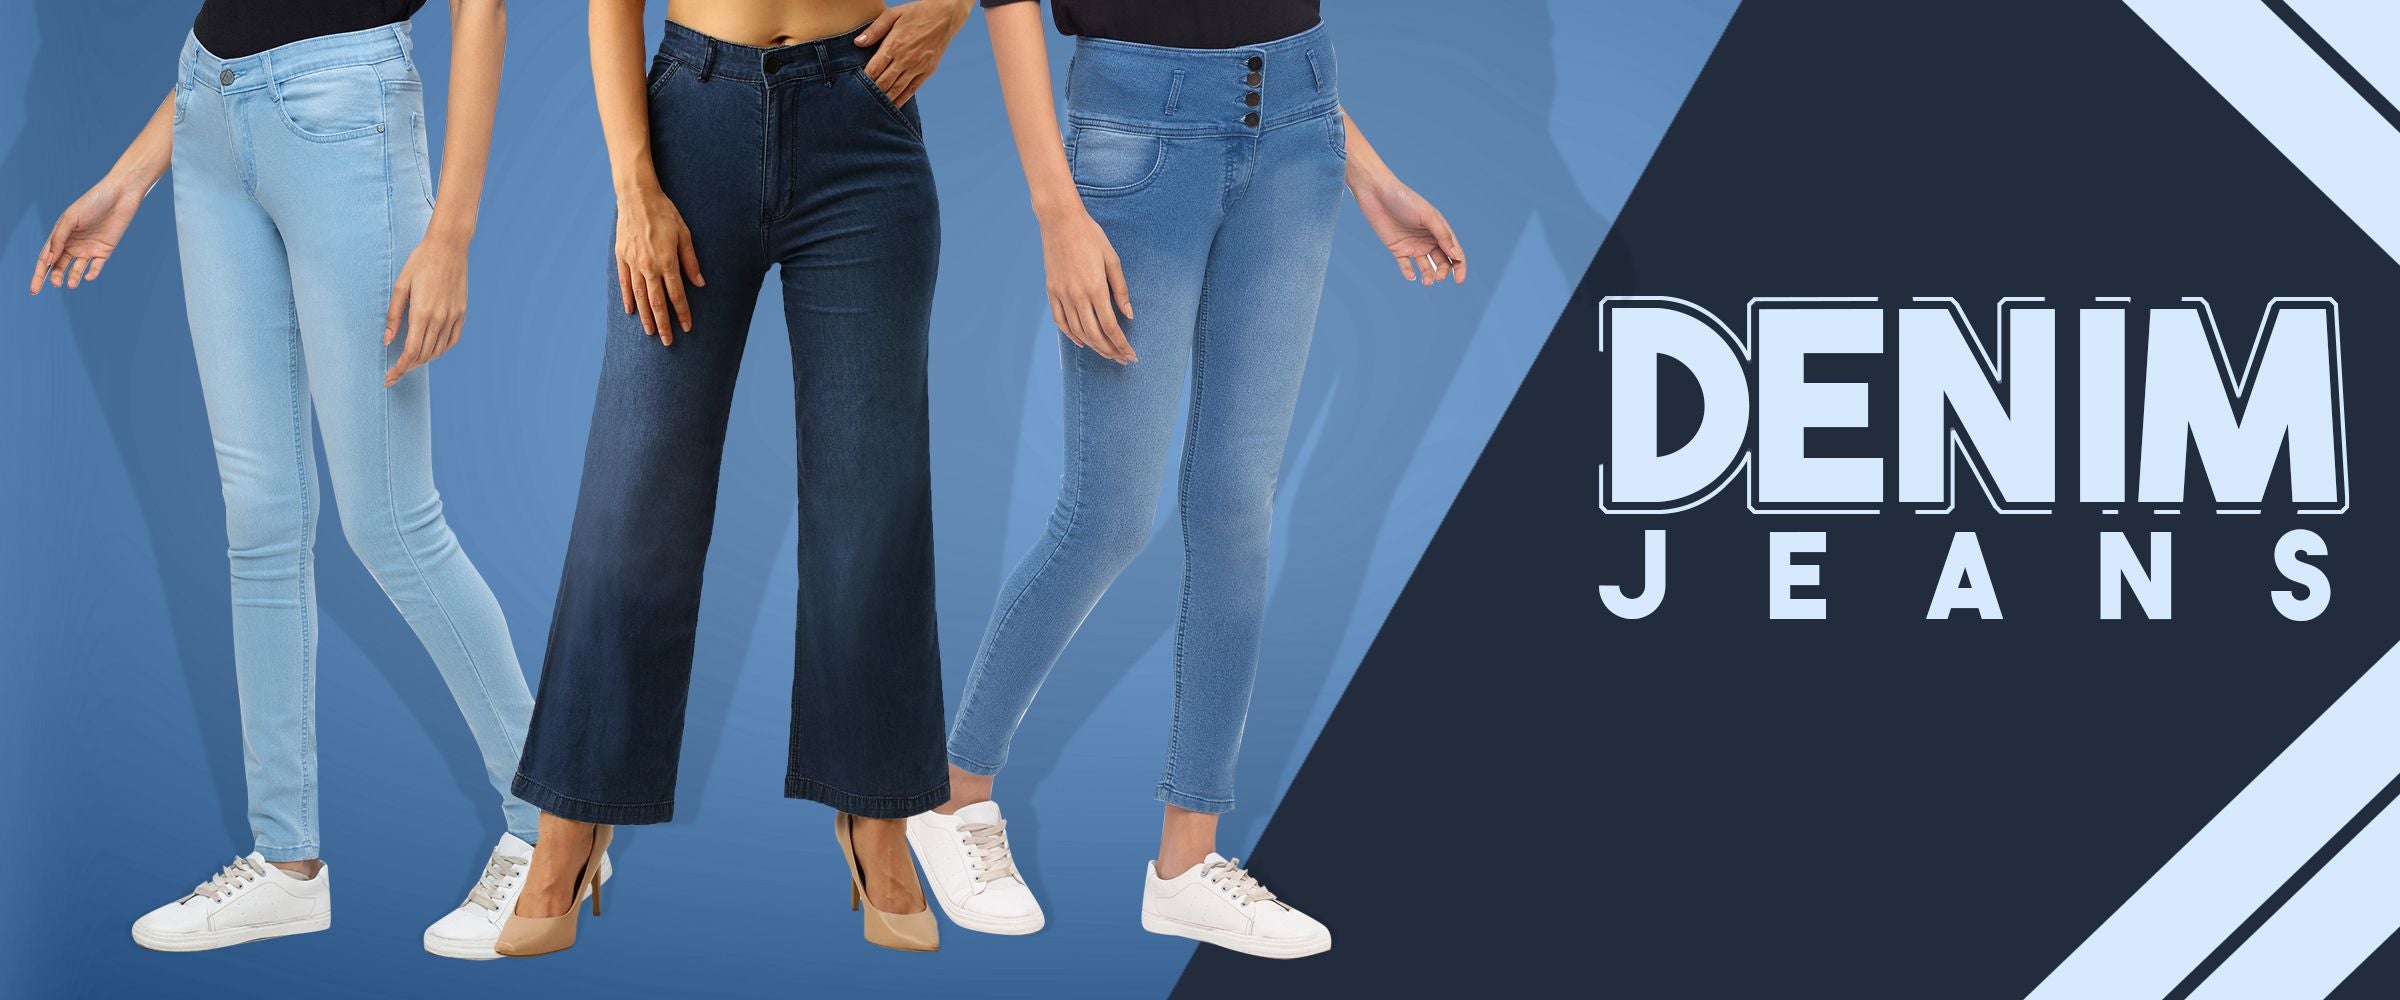 Celebrating 80 Years of Women's Jeans : Levi Strauss & Co